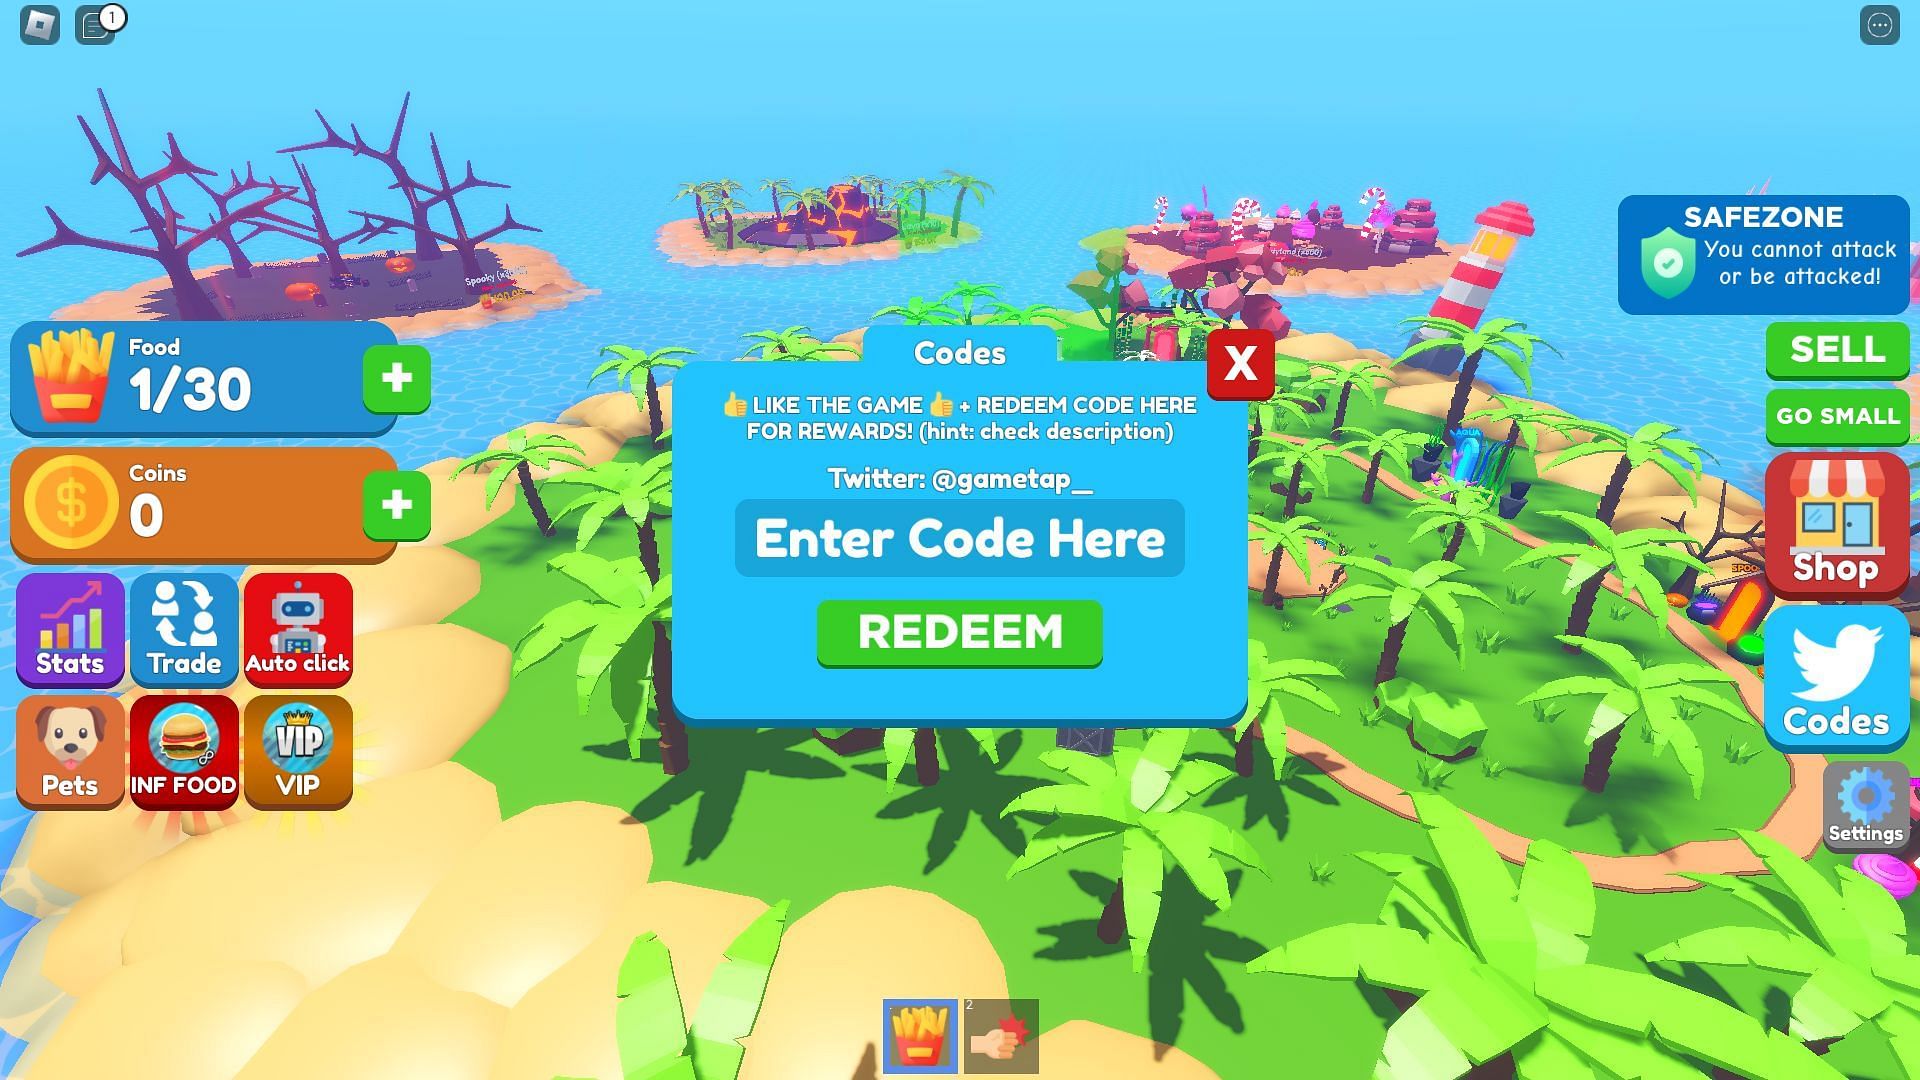 Active codes for Eating Simulator (Image via Roblox)